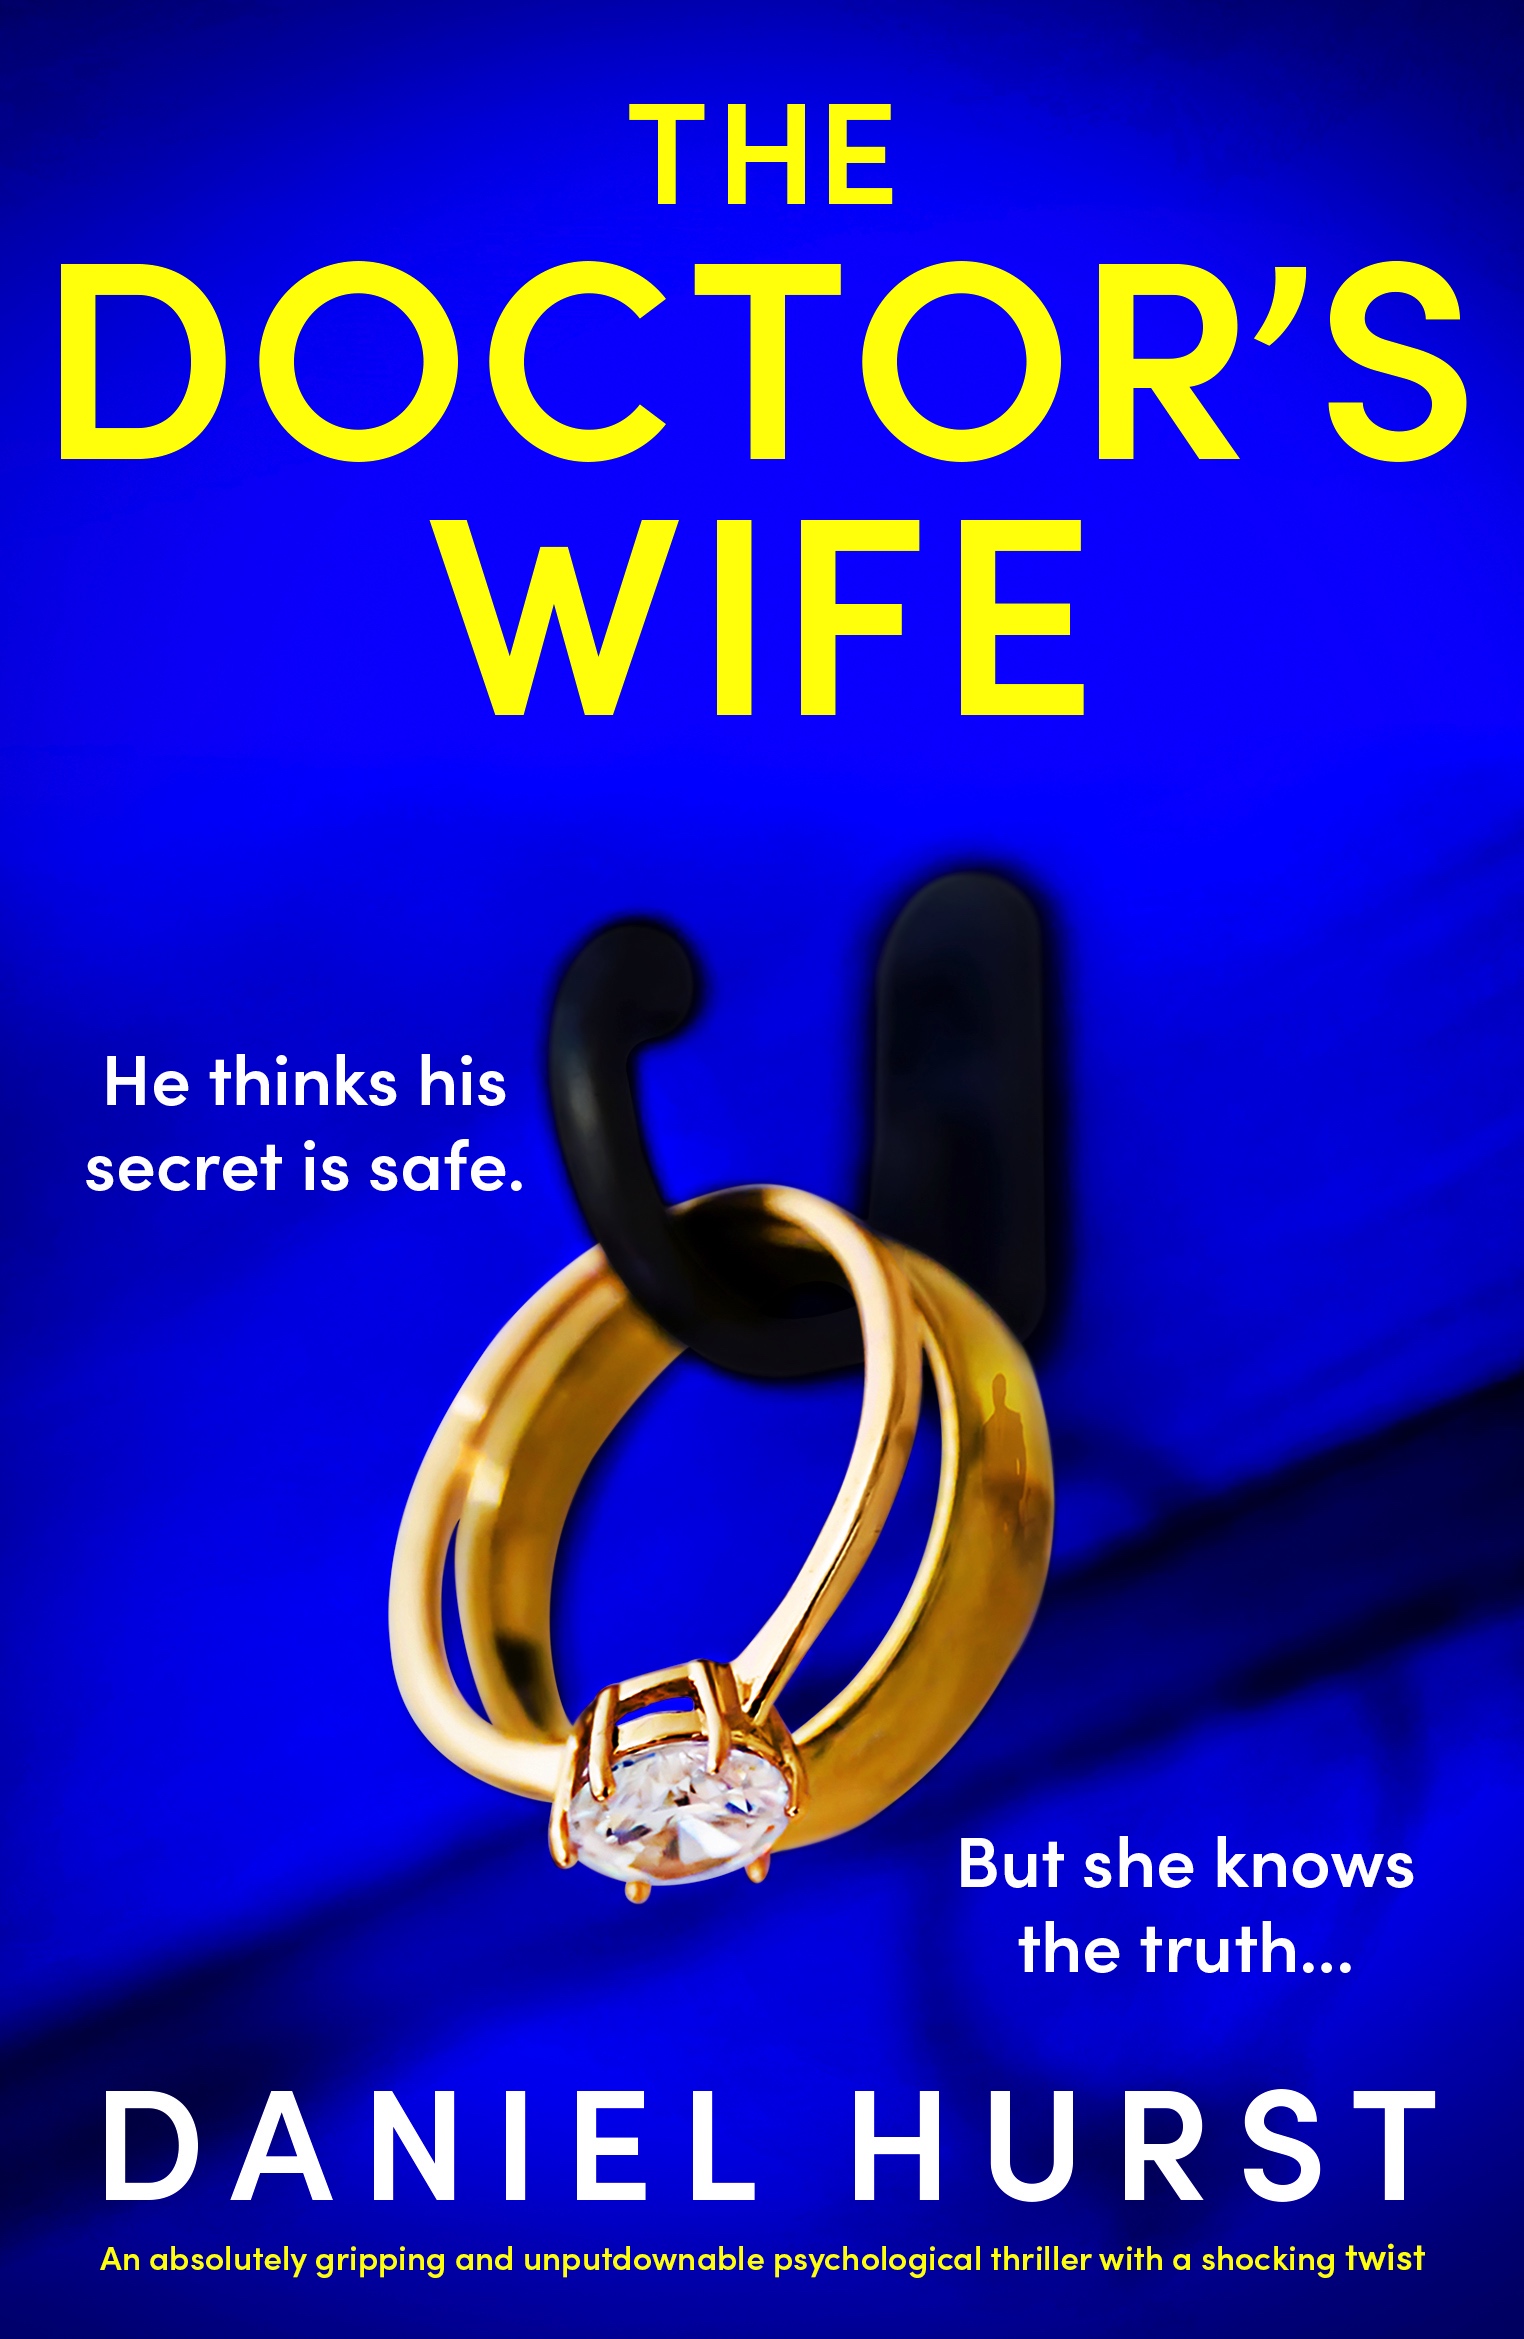 The Doctor's Wife book cover